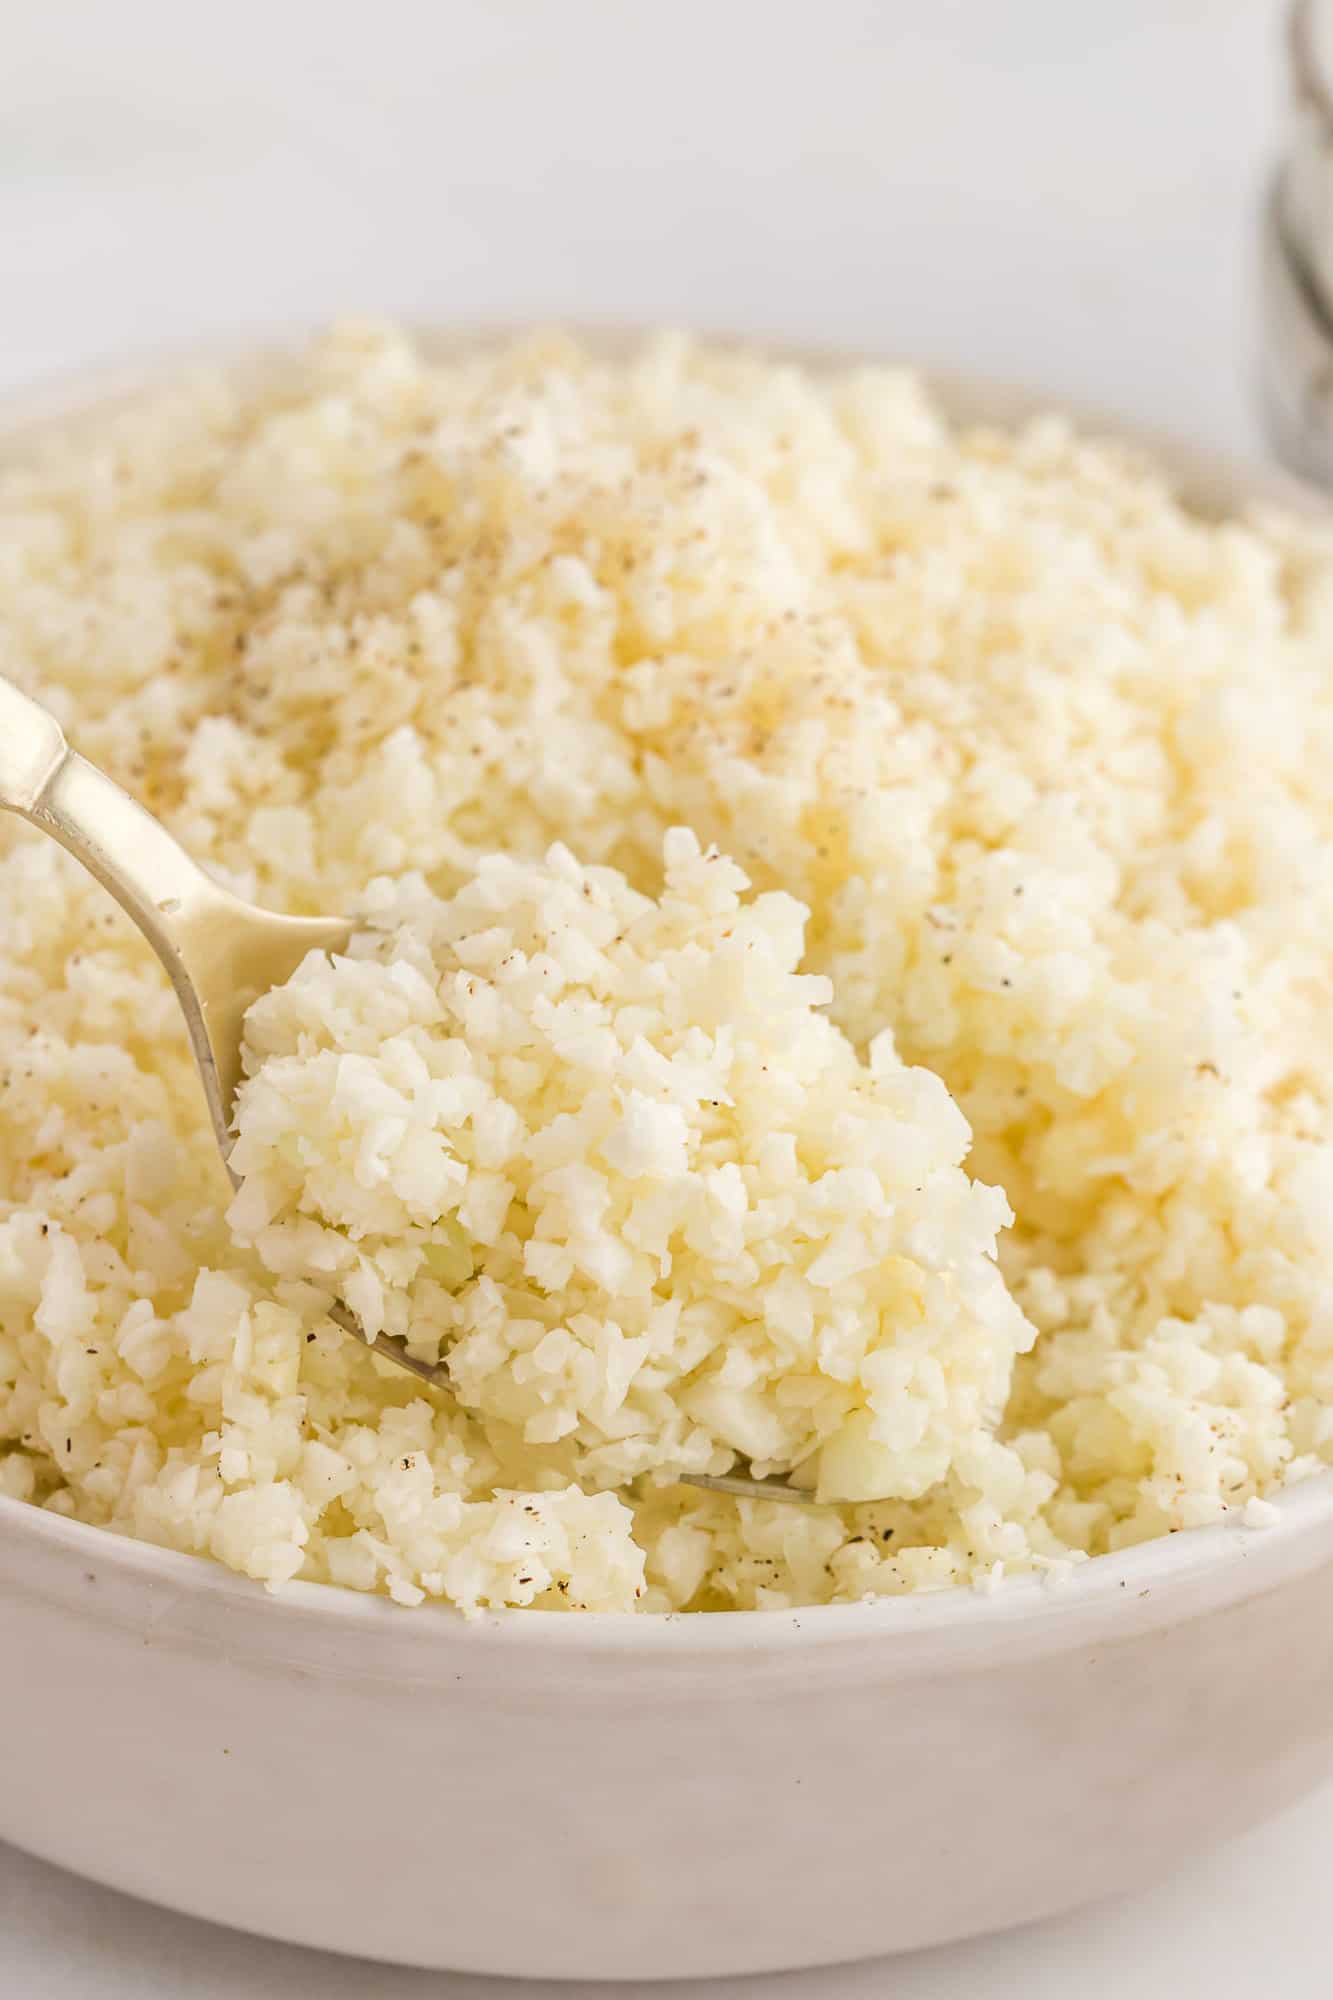 Riced cauliflower on a spoon to show texture.